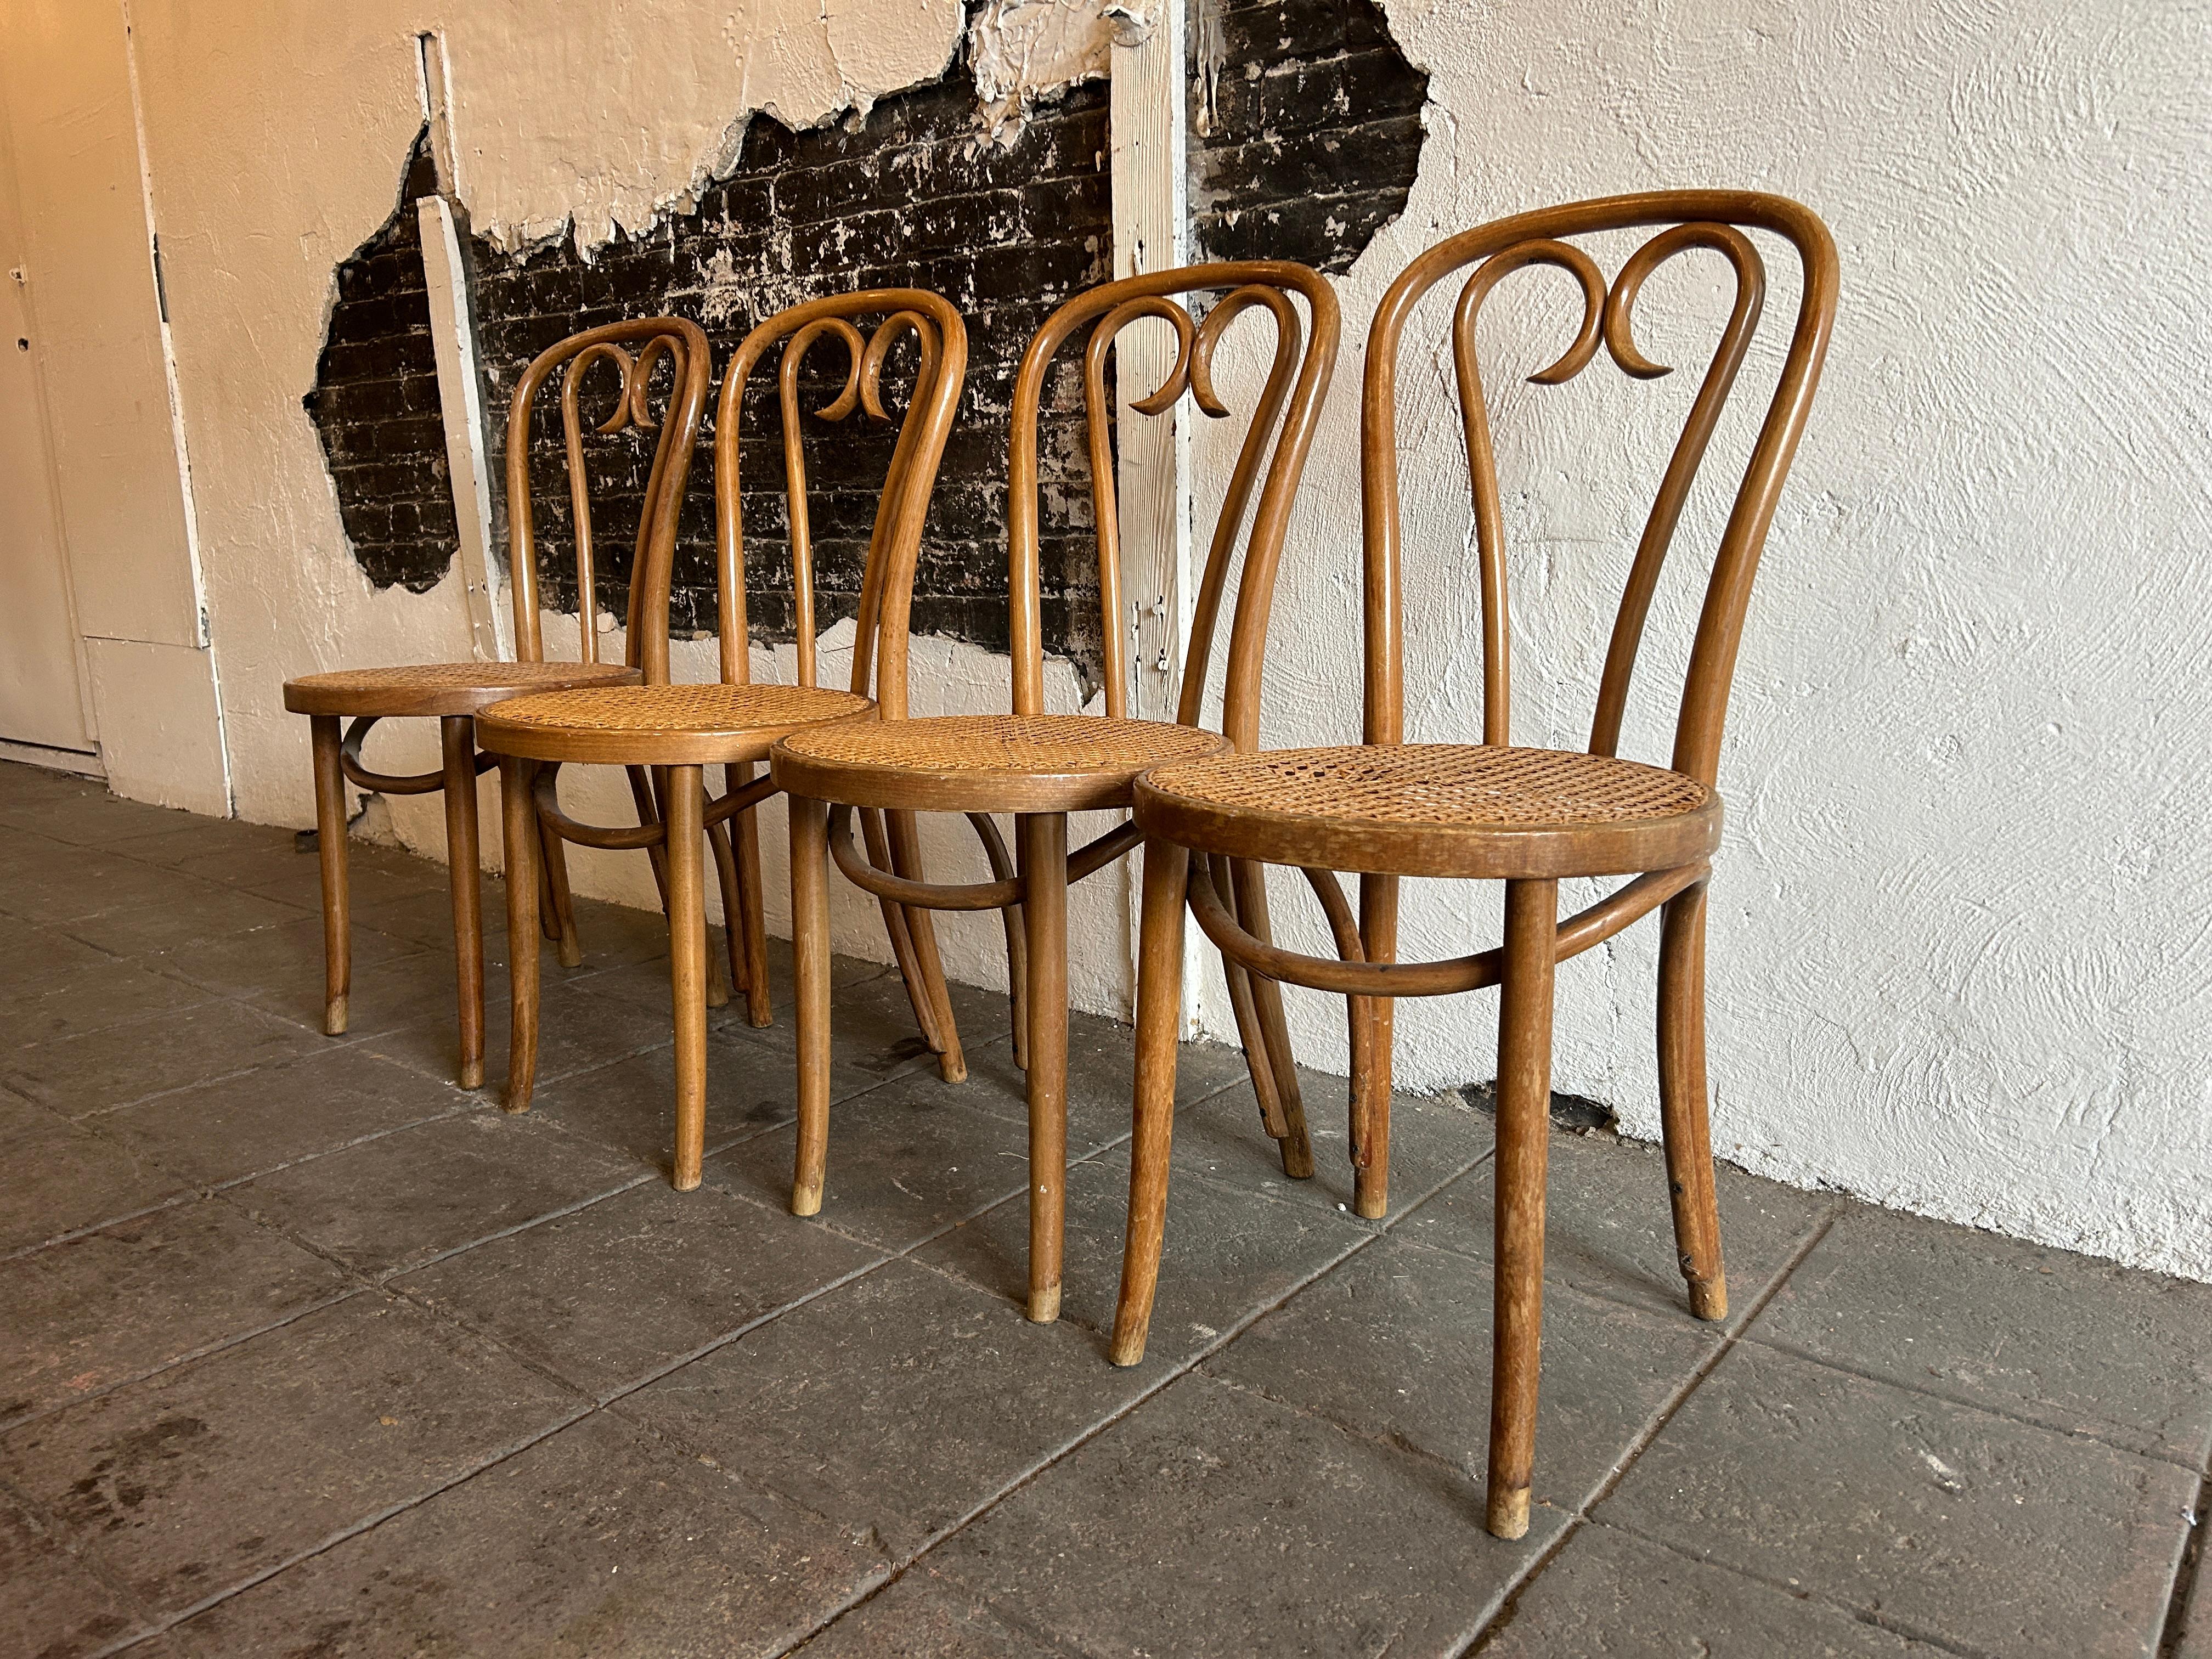 Set of 4 Mid century vintage cane seat cafe chairs by Thonet. Sweetheart chairs. They are in original condition with nice patina. The light Brown Walnut wood has been oiled showing honest wear and ready for use. All Cane is in hand done and original